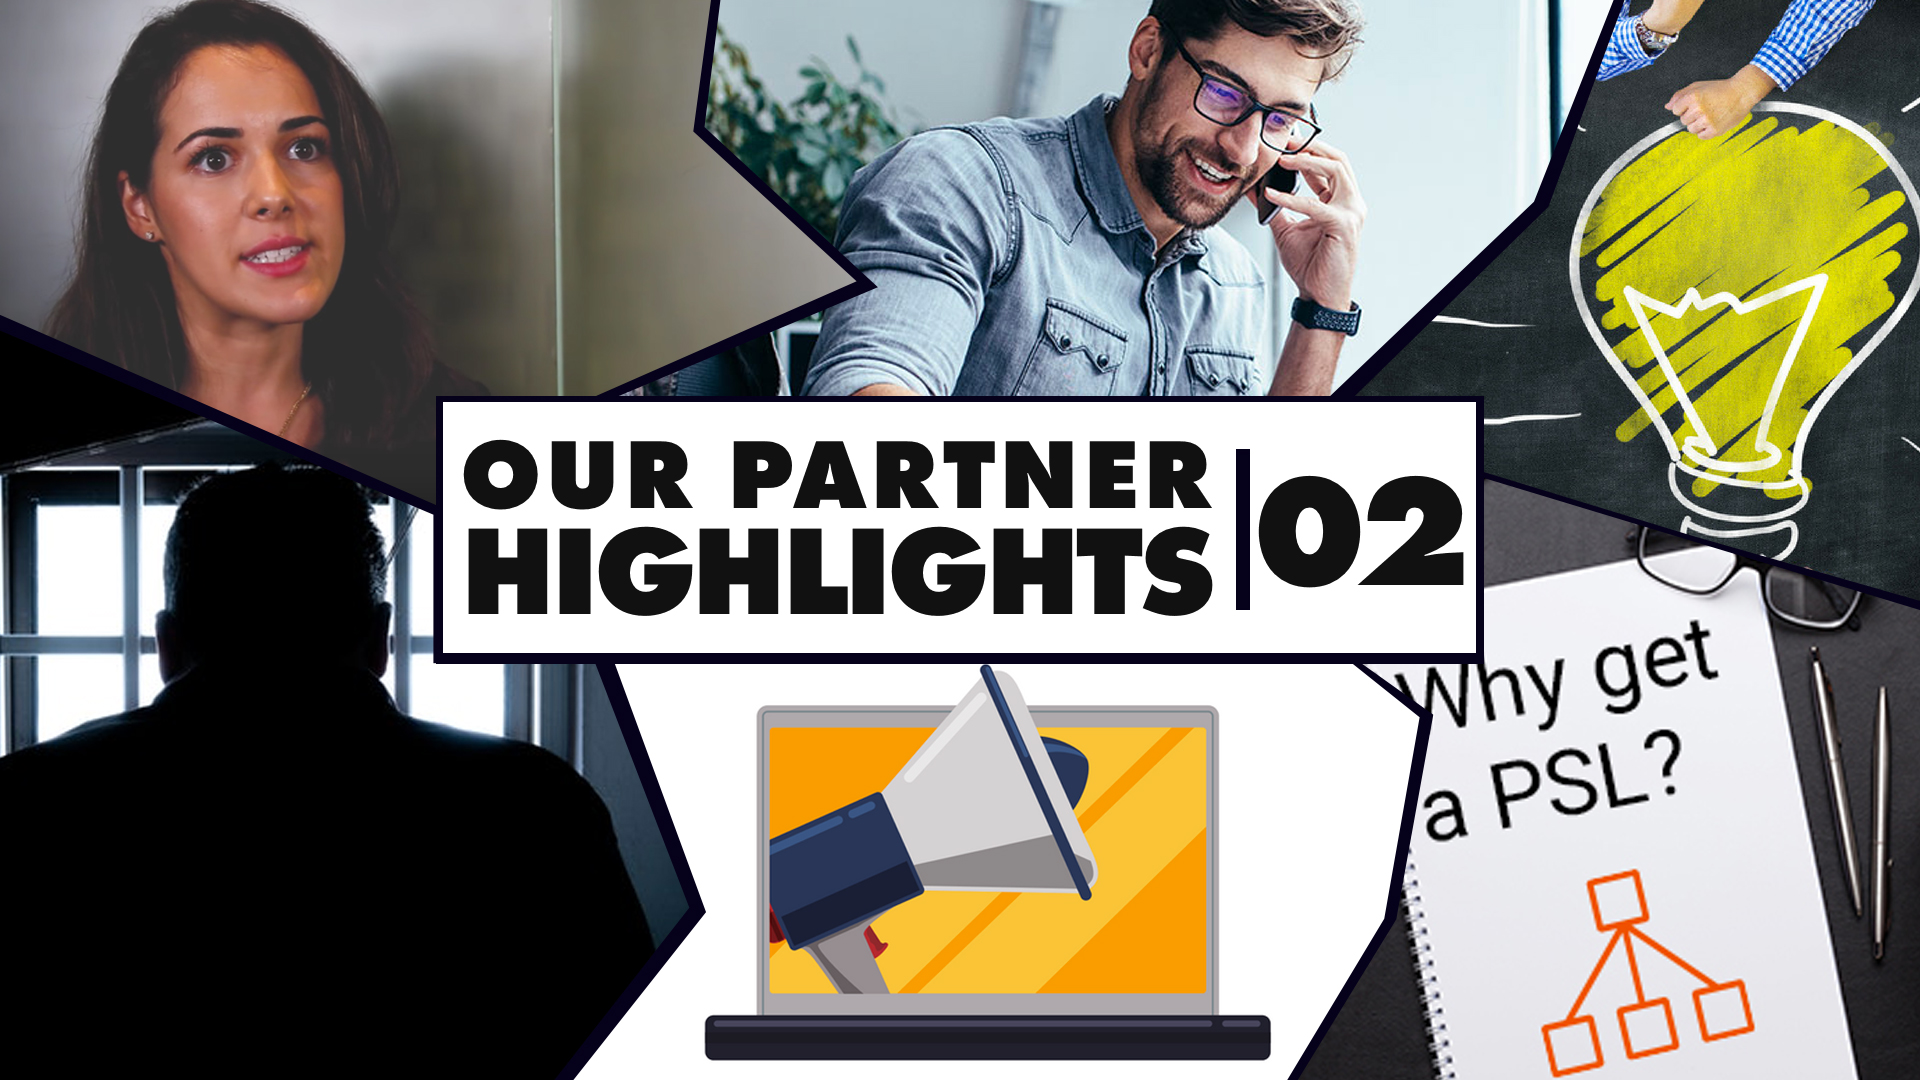 Our Partner Highlights | 02